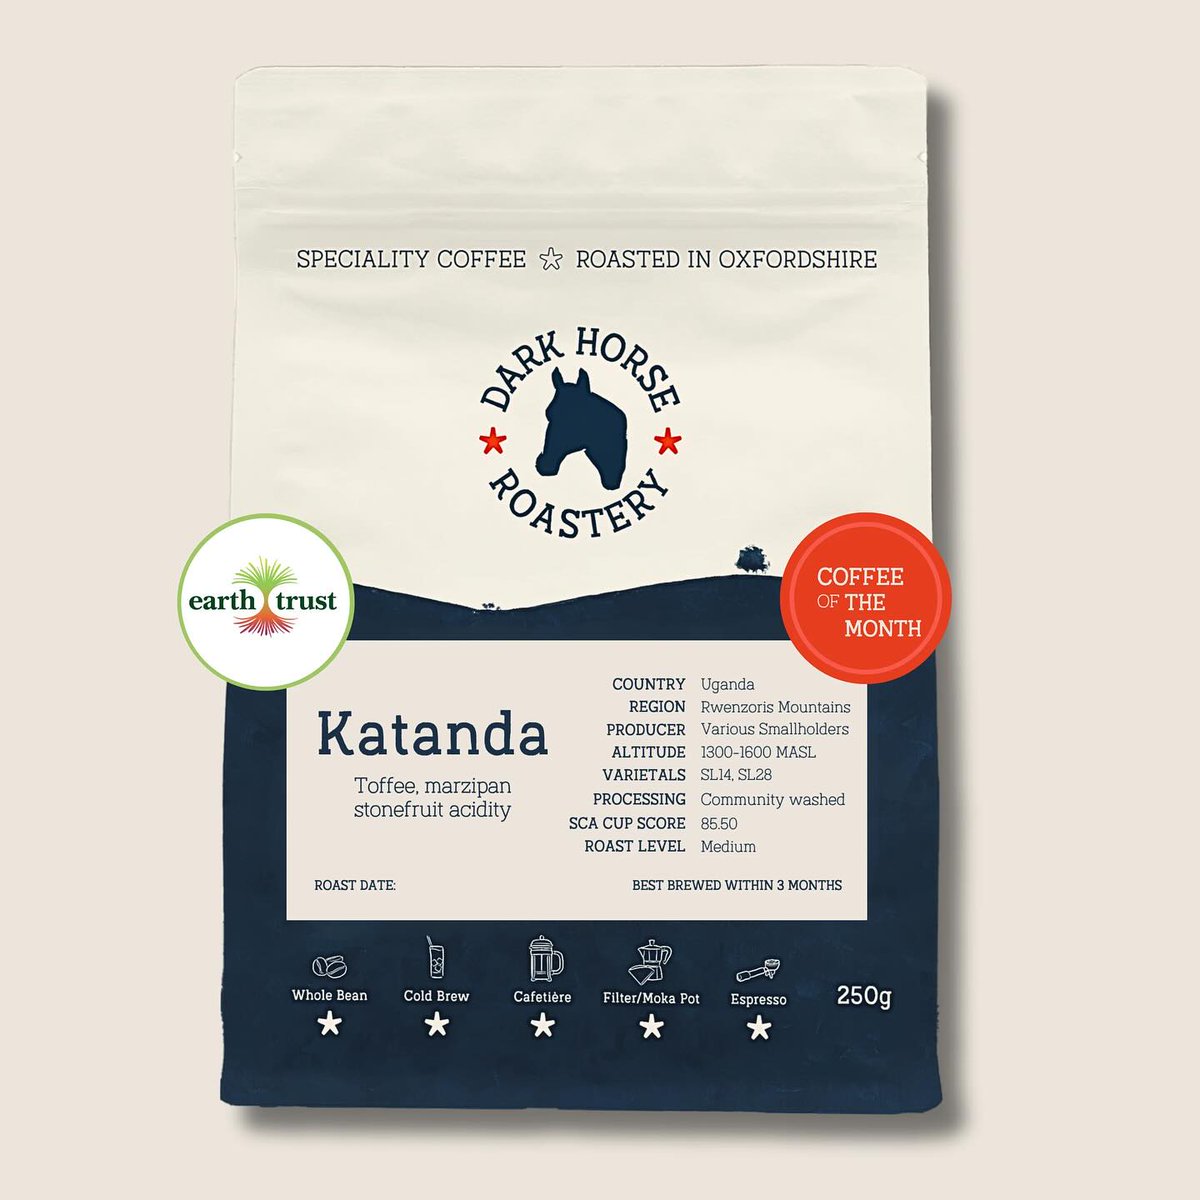 Excited to share corporate member Dark Horse Roastery is supporting us with a fundraising roast of the month! Sourced from a coffee growing community in the mountains of Uganda, 15% of Katanda sales in April go to help our wetlands work 👏 ☕buy yours at darkhorseroastery.co.uk